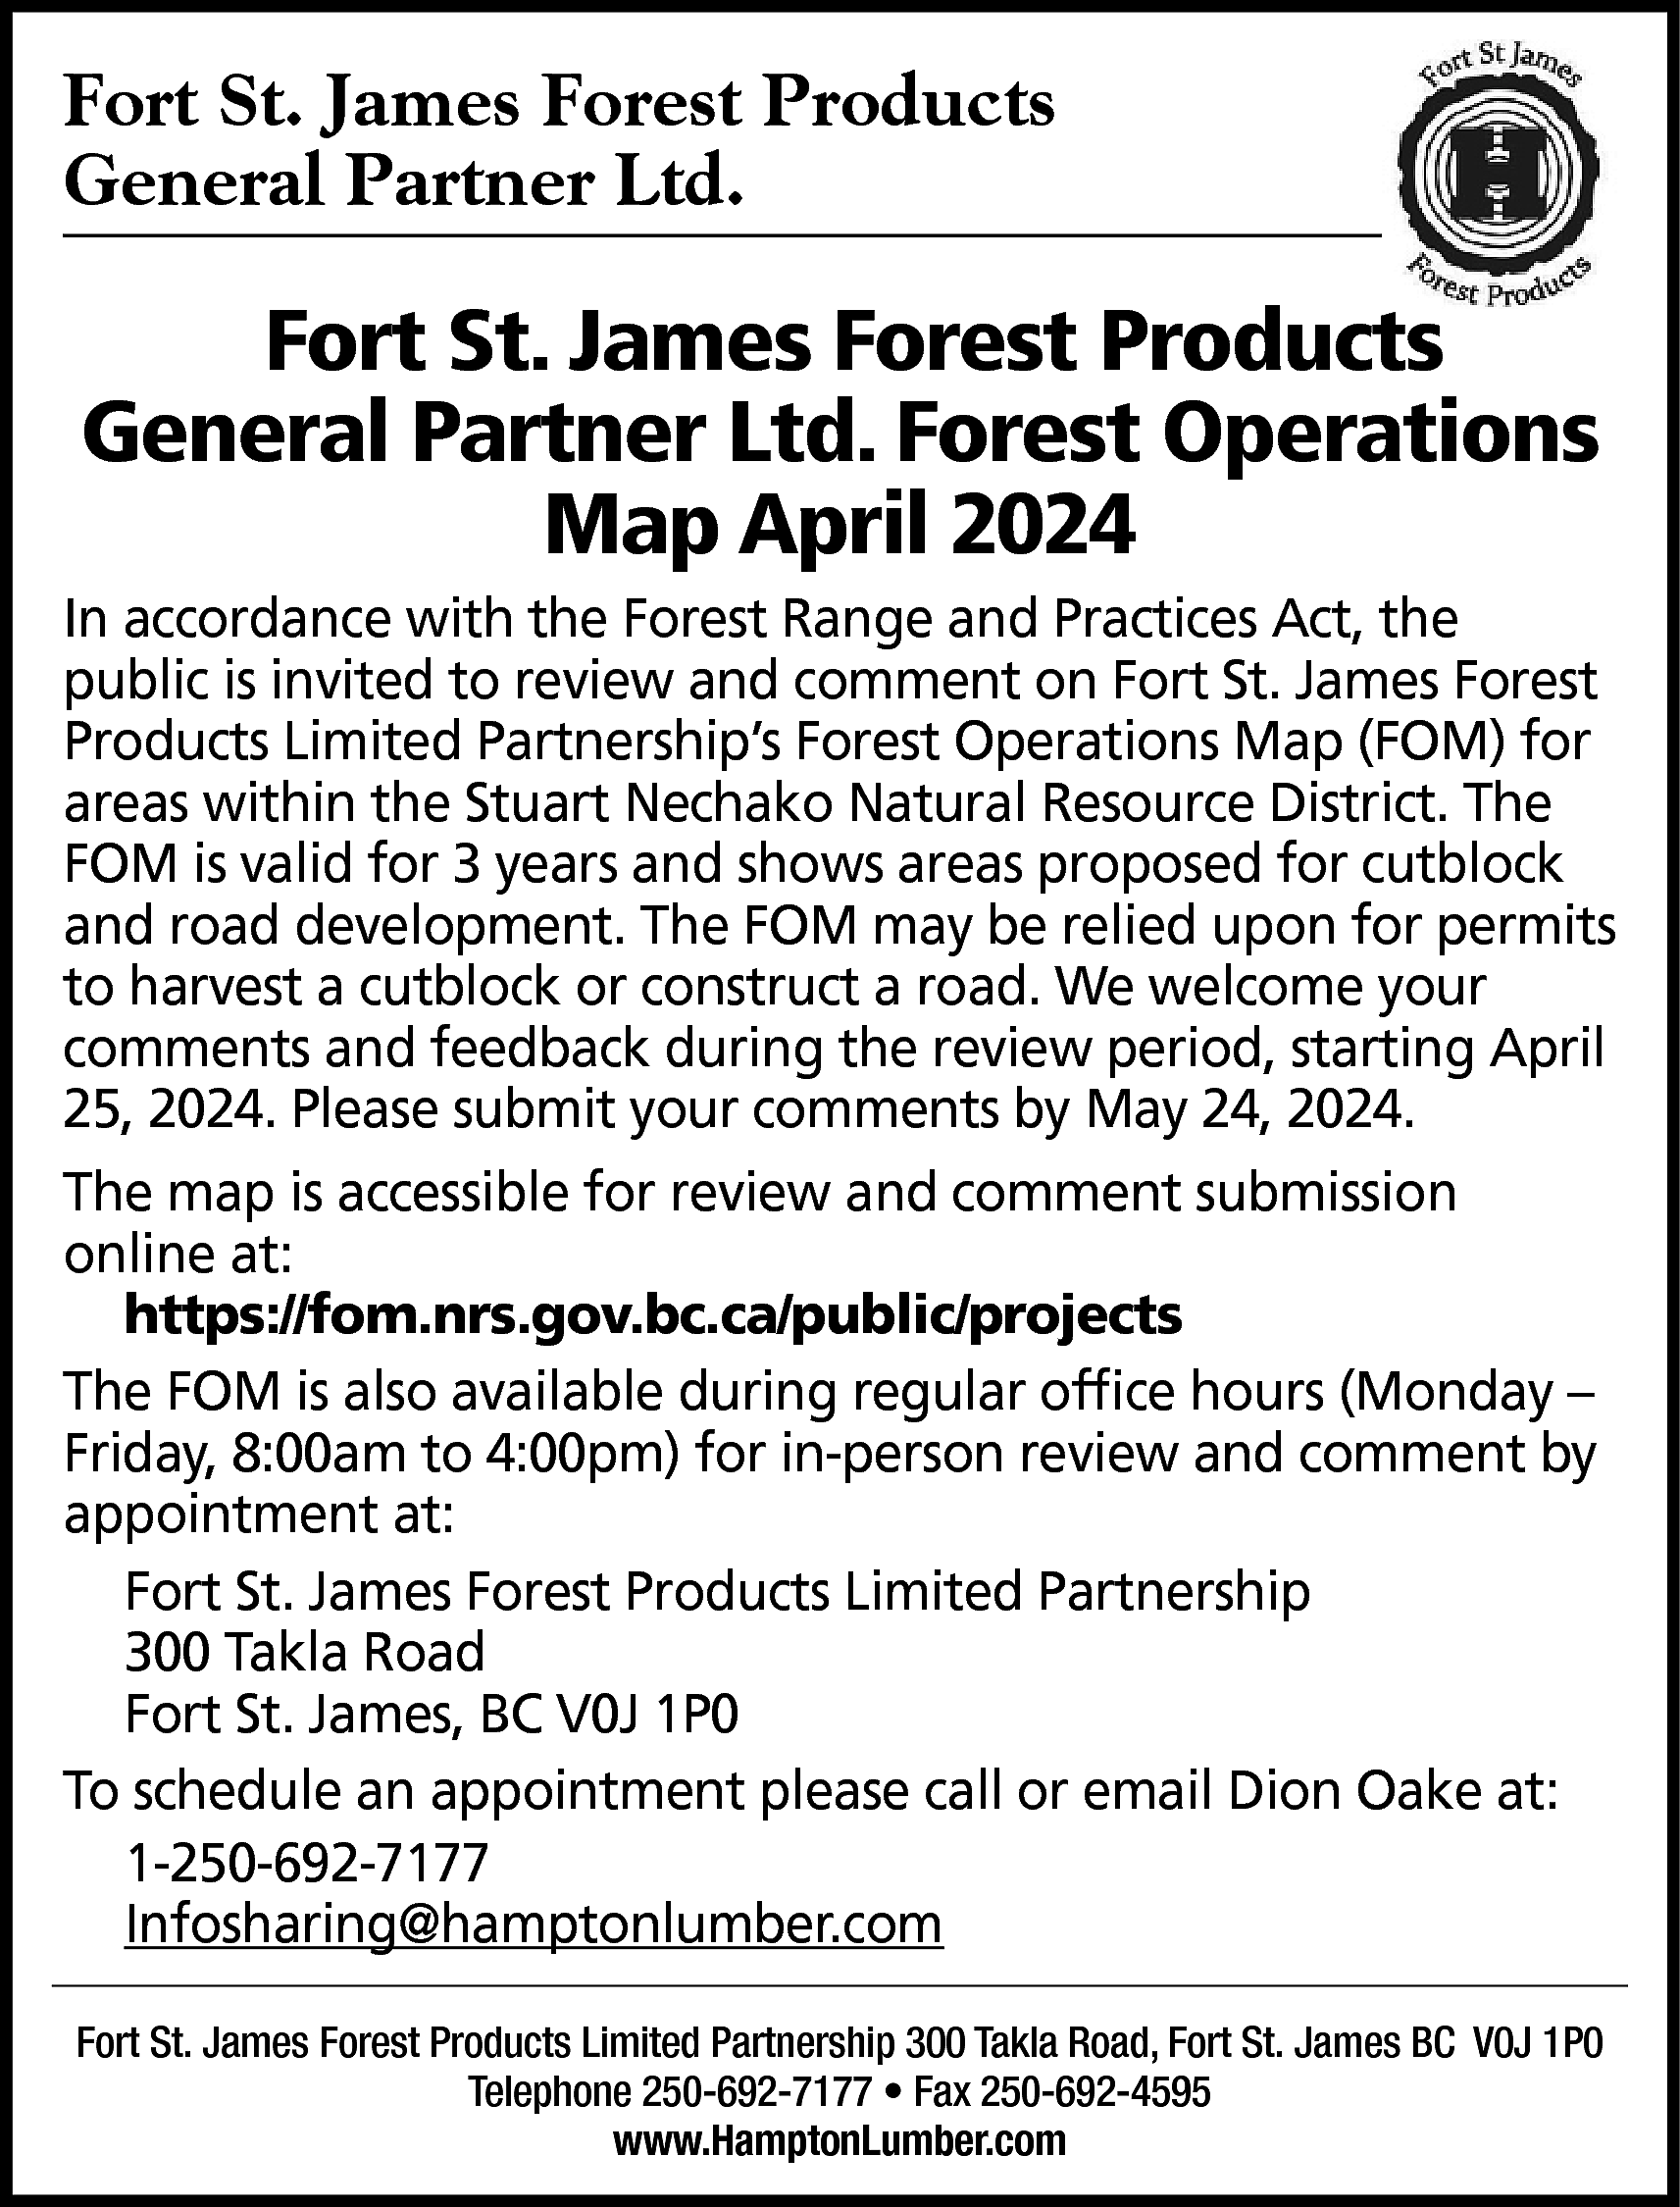 Fort St. James Forest Products  Fort St. James Forest Products  General Partner Ltd.    Fort St. James Forest Products  General Partner Ltd. Forest Operations  Map April 2024  In accordance with the Forest Range and Practices Act, the  public is invited to review and comment on Fort St. James Forest  Products Limited Partnership’s Forest Operations Map (FOM) for  areas within the Stuart Nechako Natural Resource District. The  FOM is valid for 3 years and shows areas proposed for cutblock  and road development. The FOM may be relied upon for permits  to harvest a cutblock or construct a road. We welcome your  comments and feedback during the review period, starting April  25, 2024. Please submit your comments by May 24, 2024.  The map is accessible for review and comment submission  online at:  https://fom.nrs.gov.bc.ca/public/projects  The FOM is also available during regular office hours (Monday –  Friday, 8:00am to 4:00pm) for in-person review and comment by  appointment at:  Fort St. James Forest Products Limited Partnership  300 Takla Road  Fort St. James, BC V0J 1P0  To schedule an appointment please call or email Dion Oake at:  1-250-692-7177  Infosharing@hamptonlumber.com  Fort St. James Forest Products Limited Partnership 300 Takla Road, Fort St. James BC V0J 1P0  Telephone 250-692-7177 • Fax 250-692-4595  www.HamptonLumber.com    